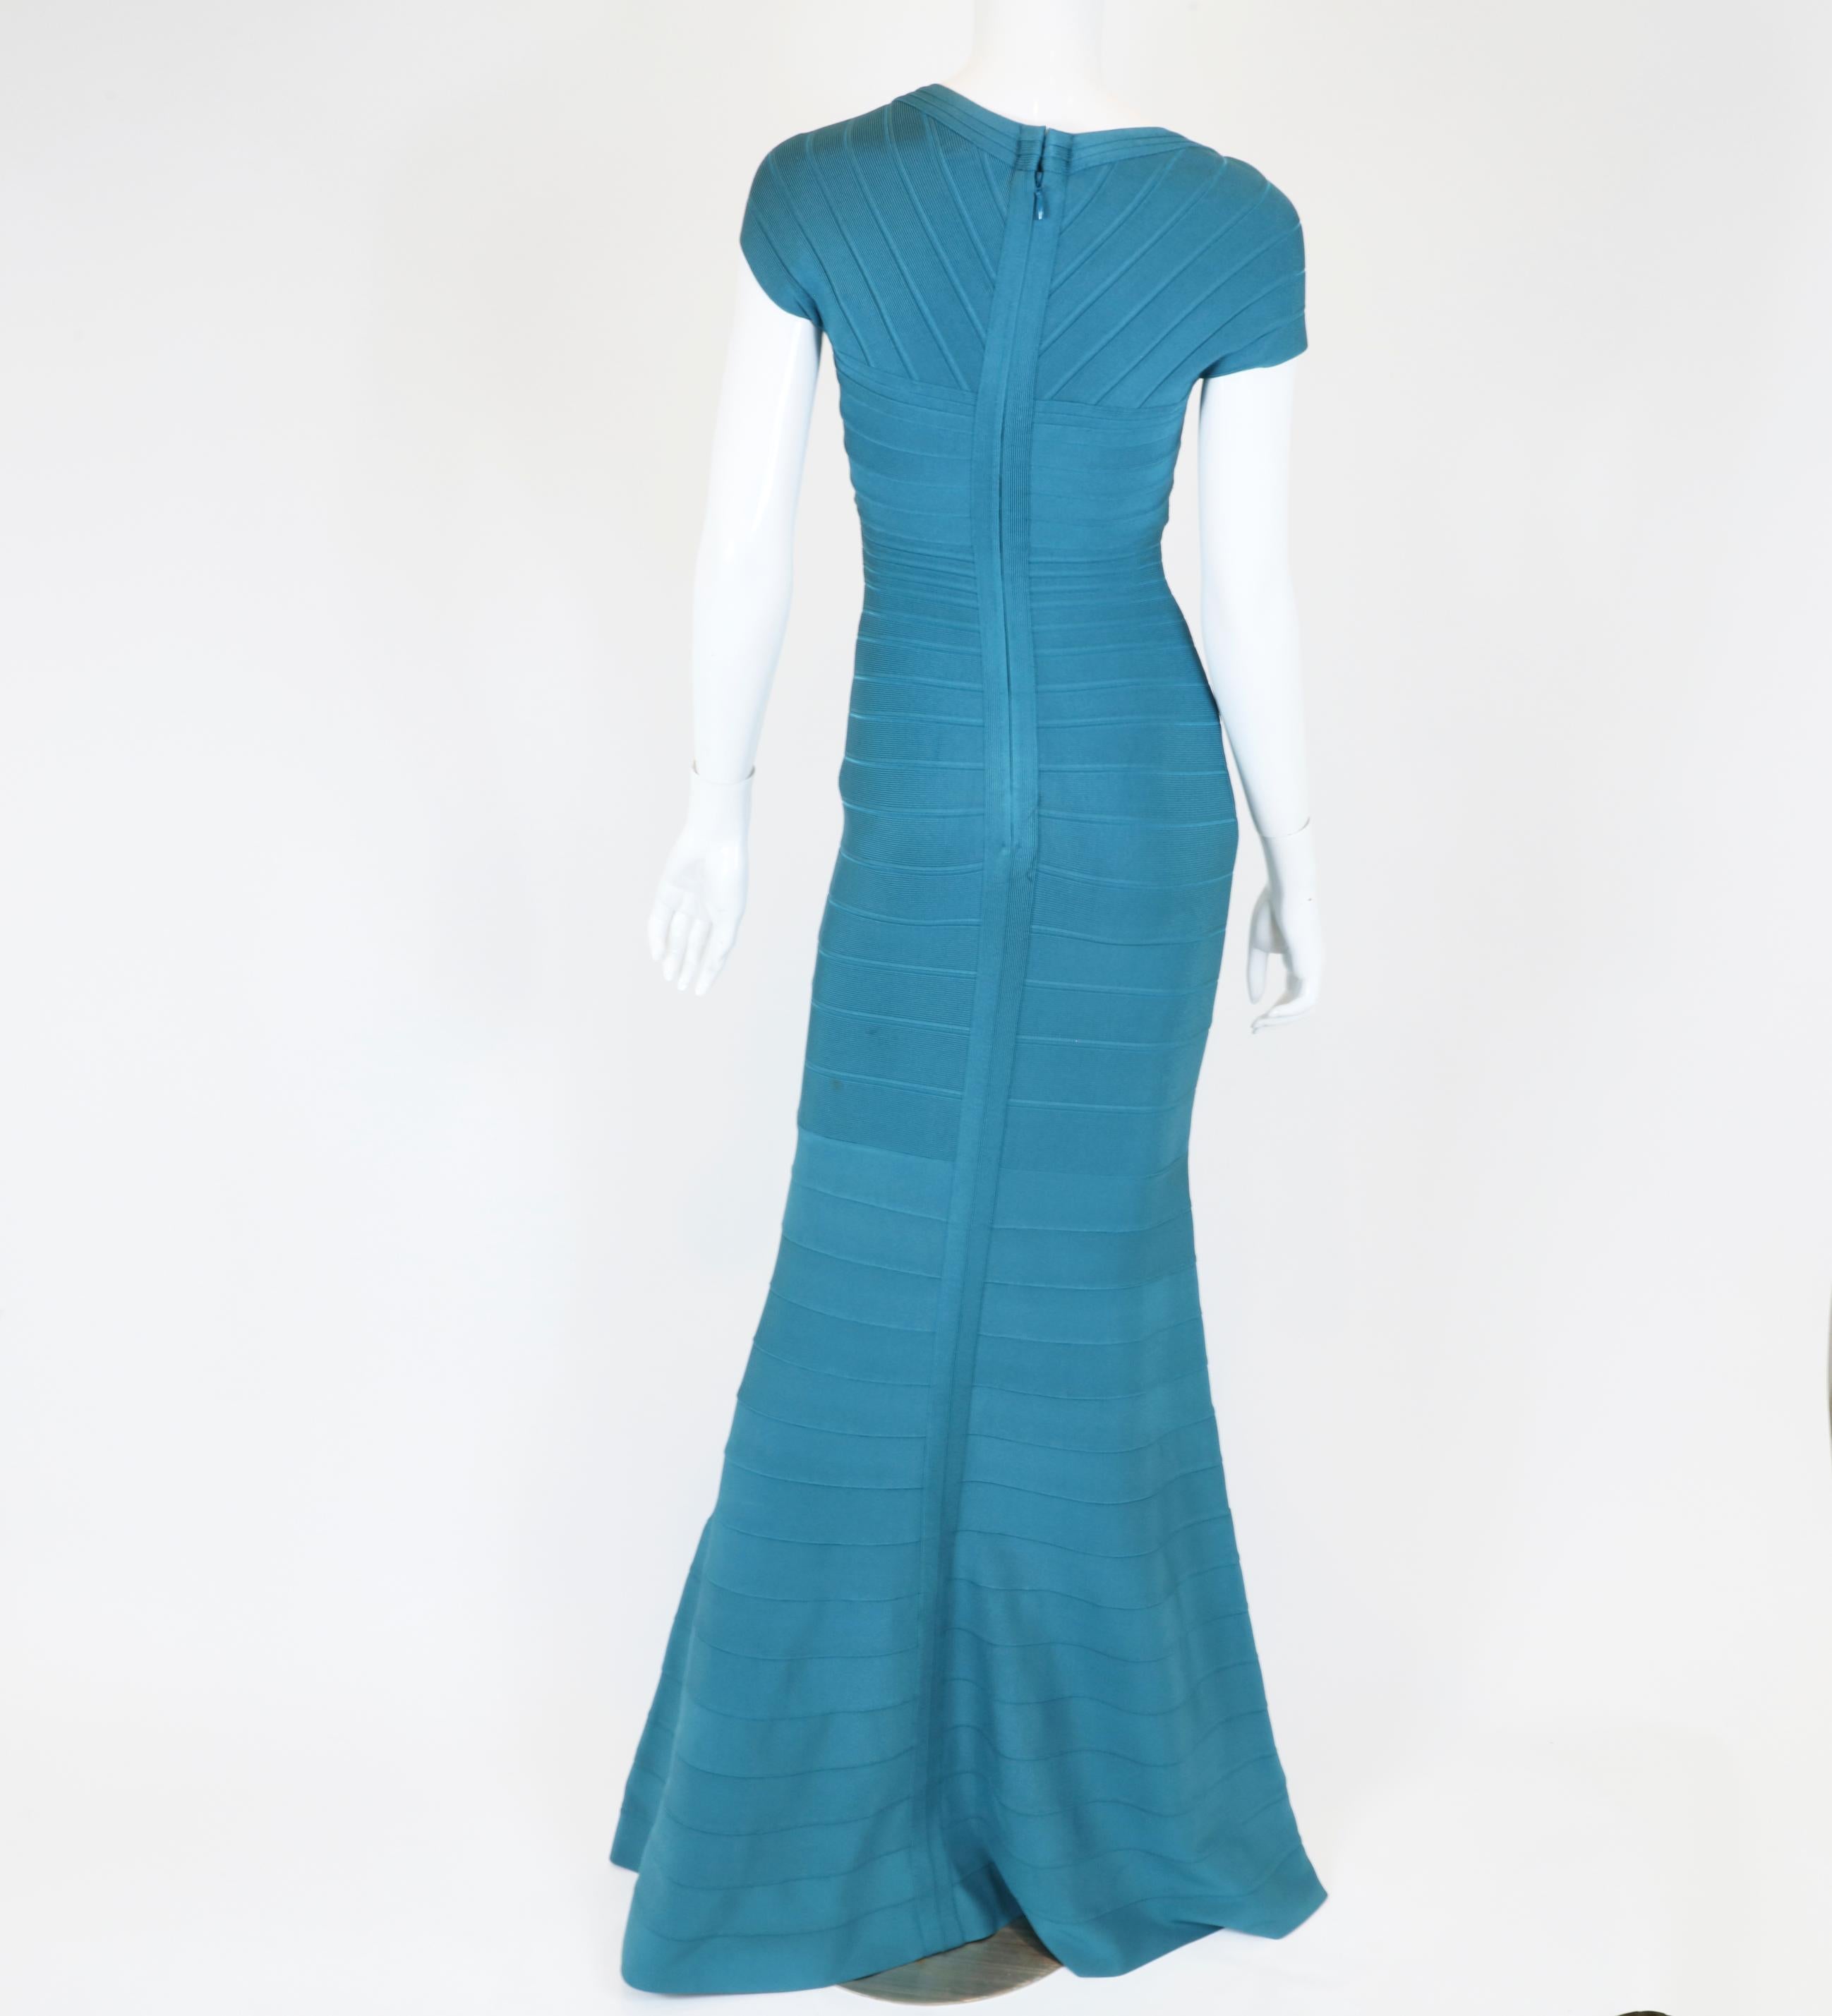 Women's Herve Leger Size XS Teal Dress
Short Sleeve Gown with Zipper in the Back
